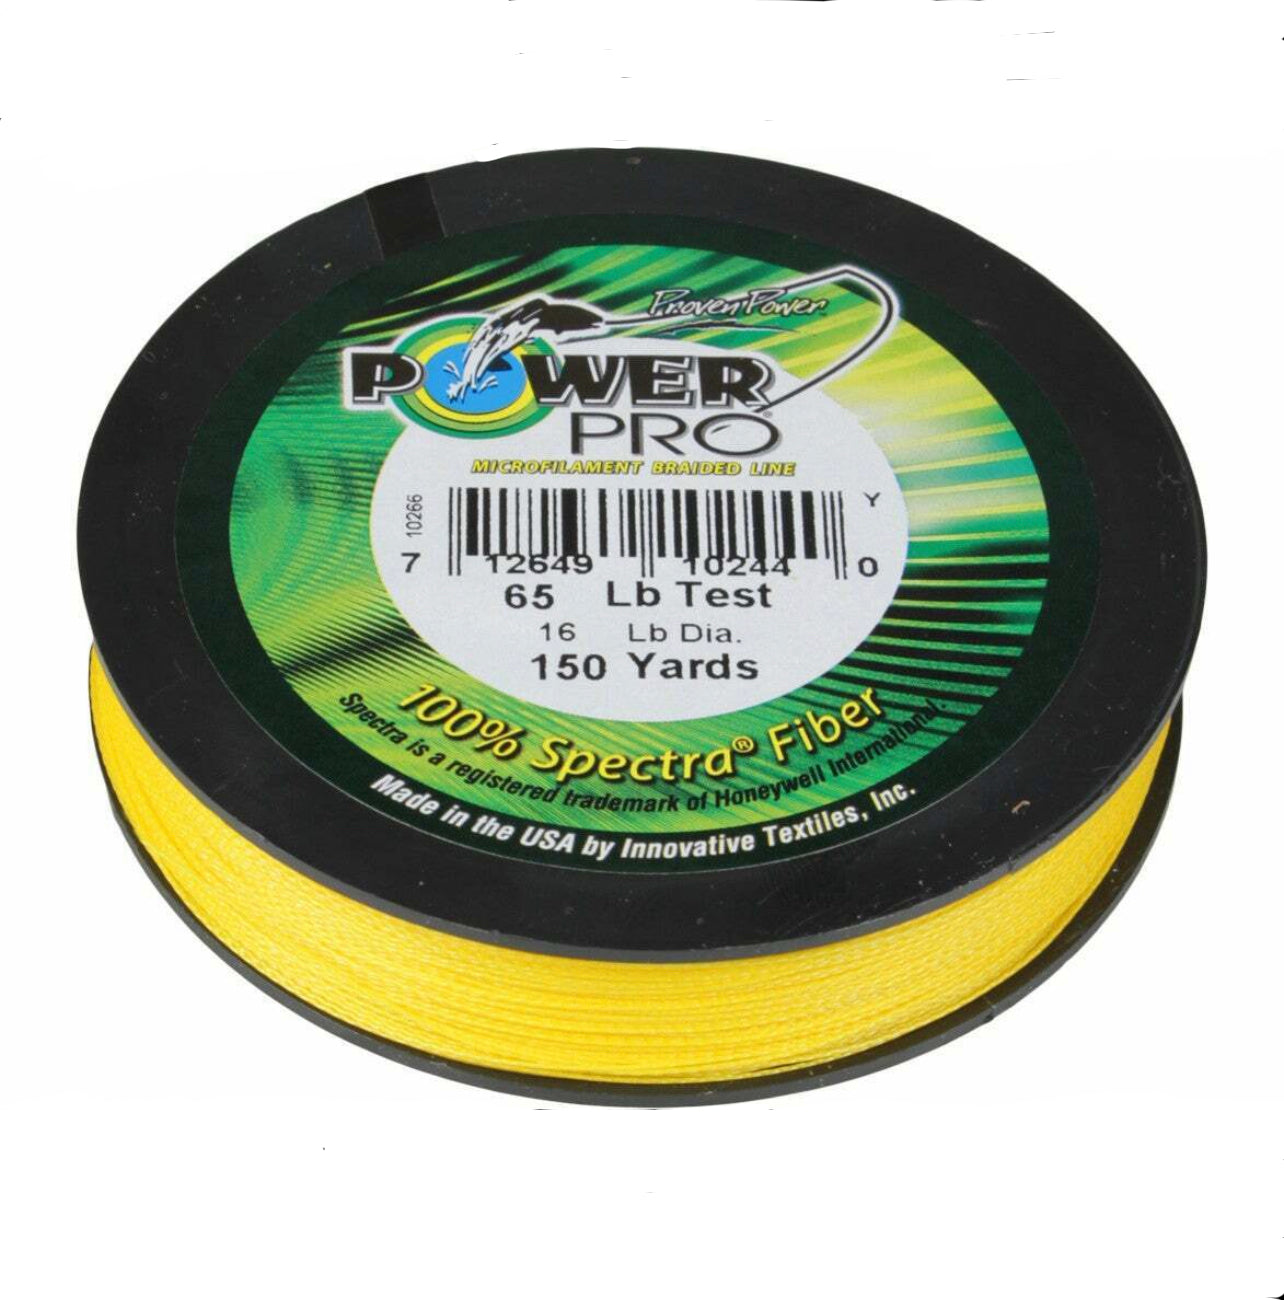 Spectra Braided Fishing Line, Green, 300 yds.